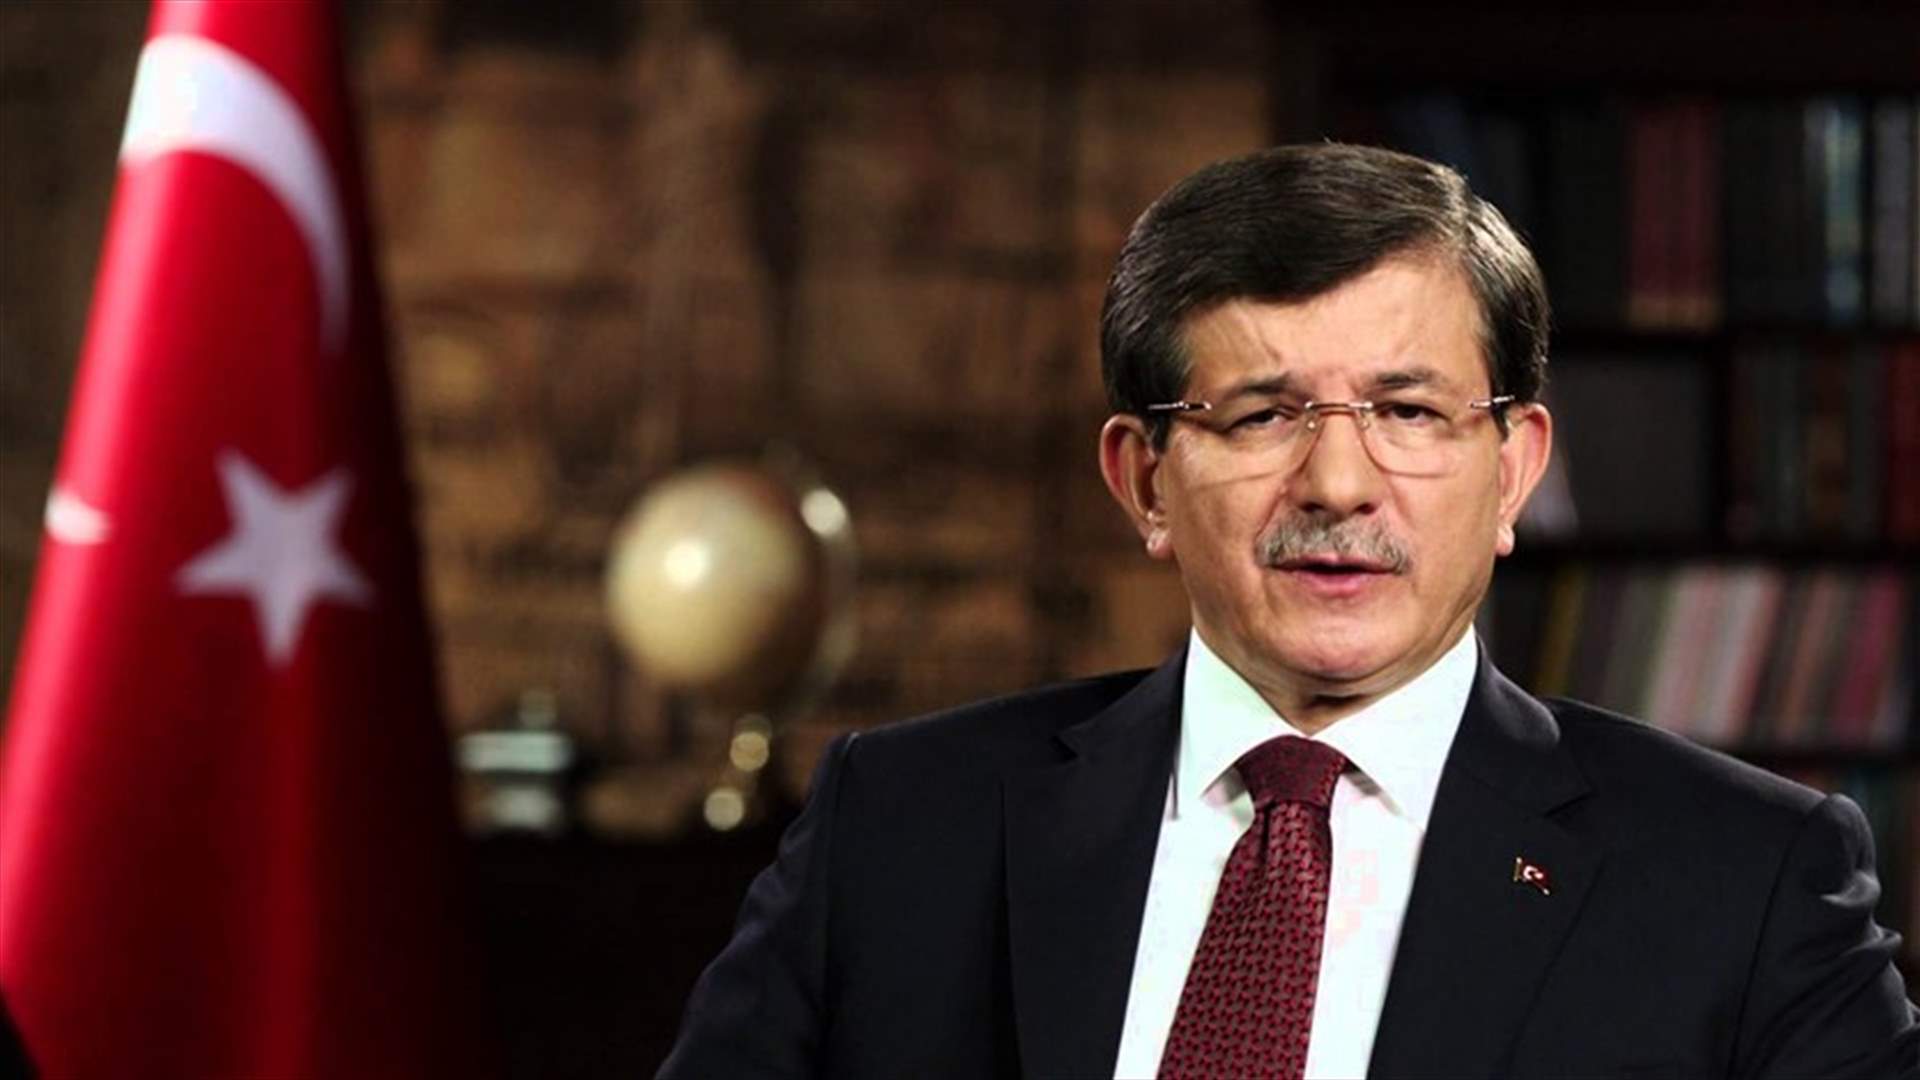 Turkey could send ground troops into Syria in self-defense - PM